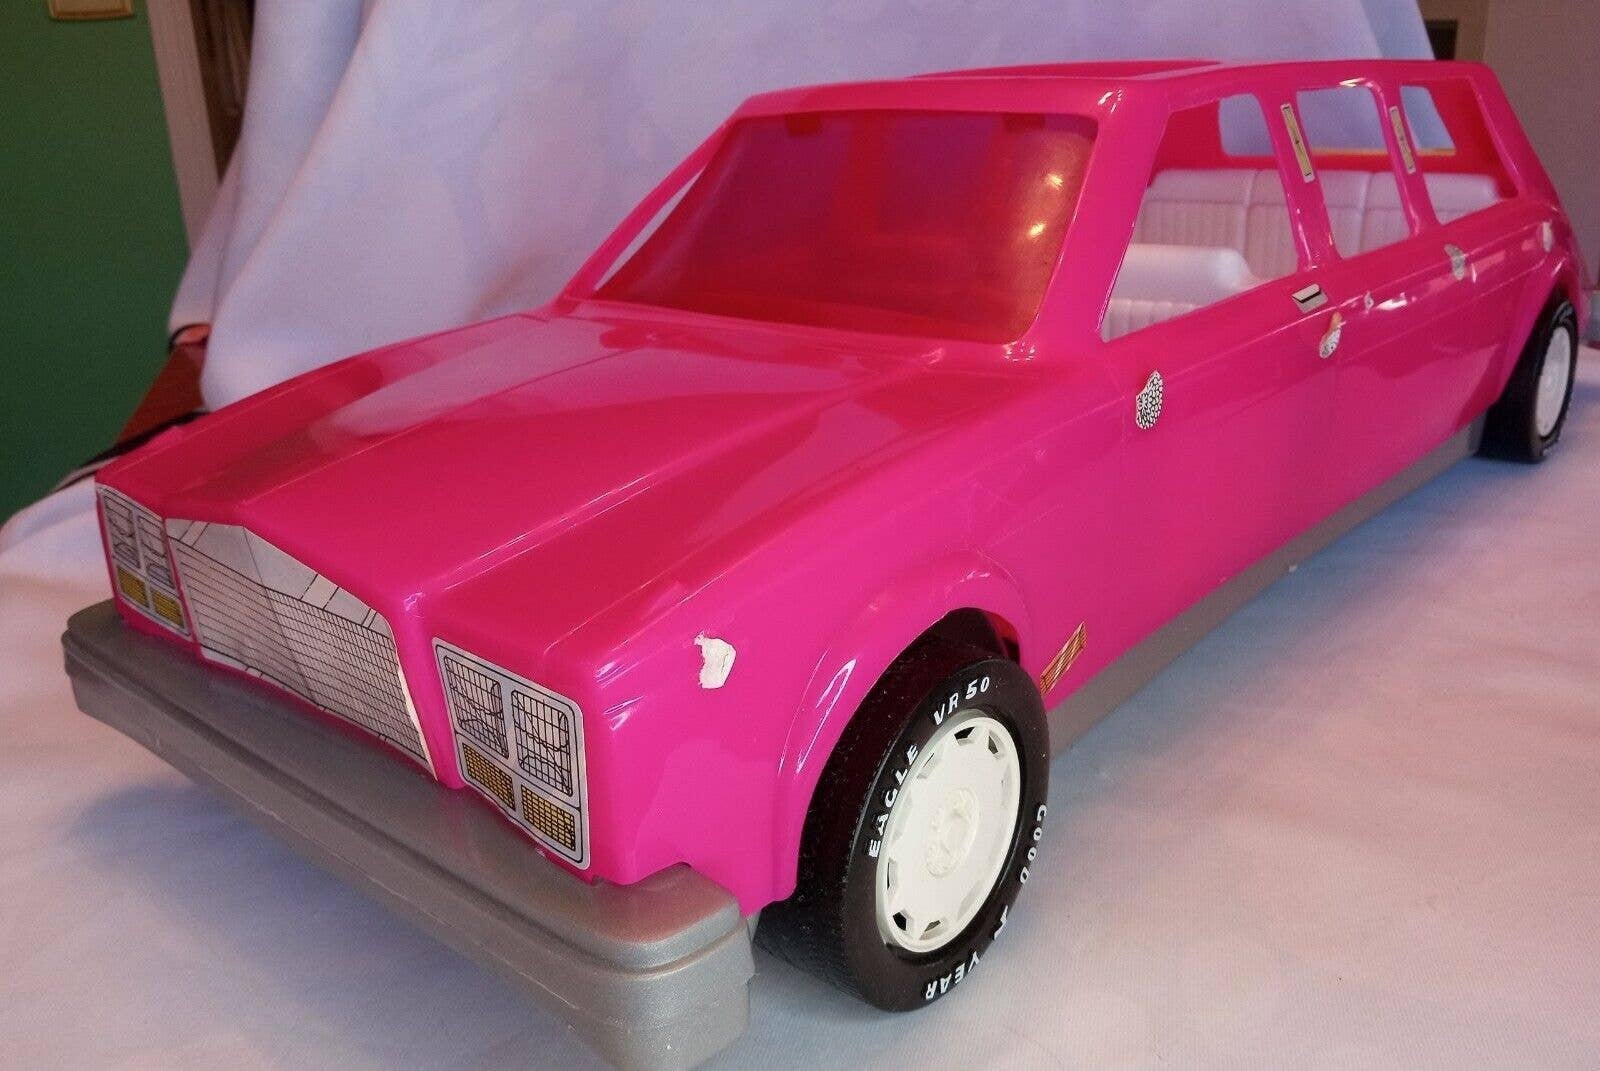 Vintage Size Pink Stretch Limo Car by American - Etsy